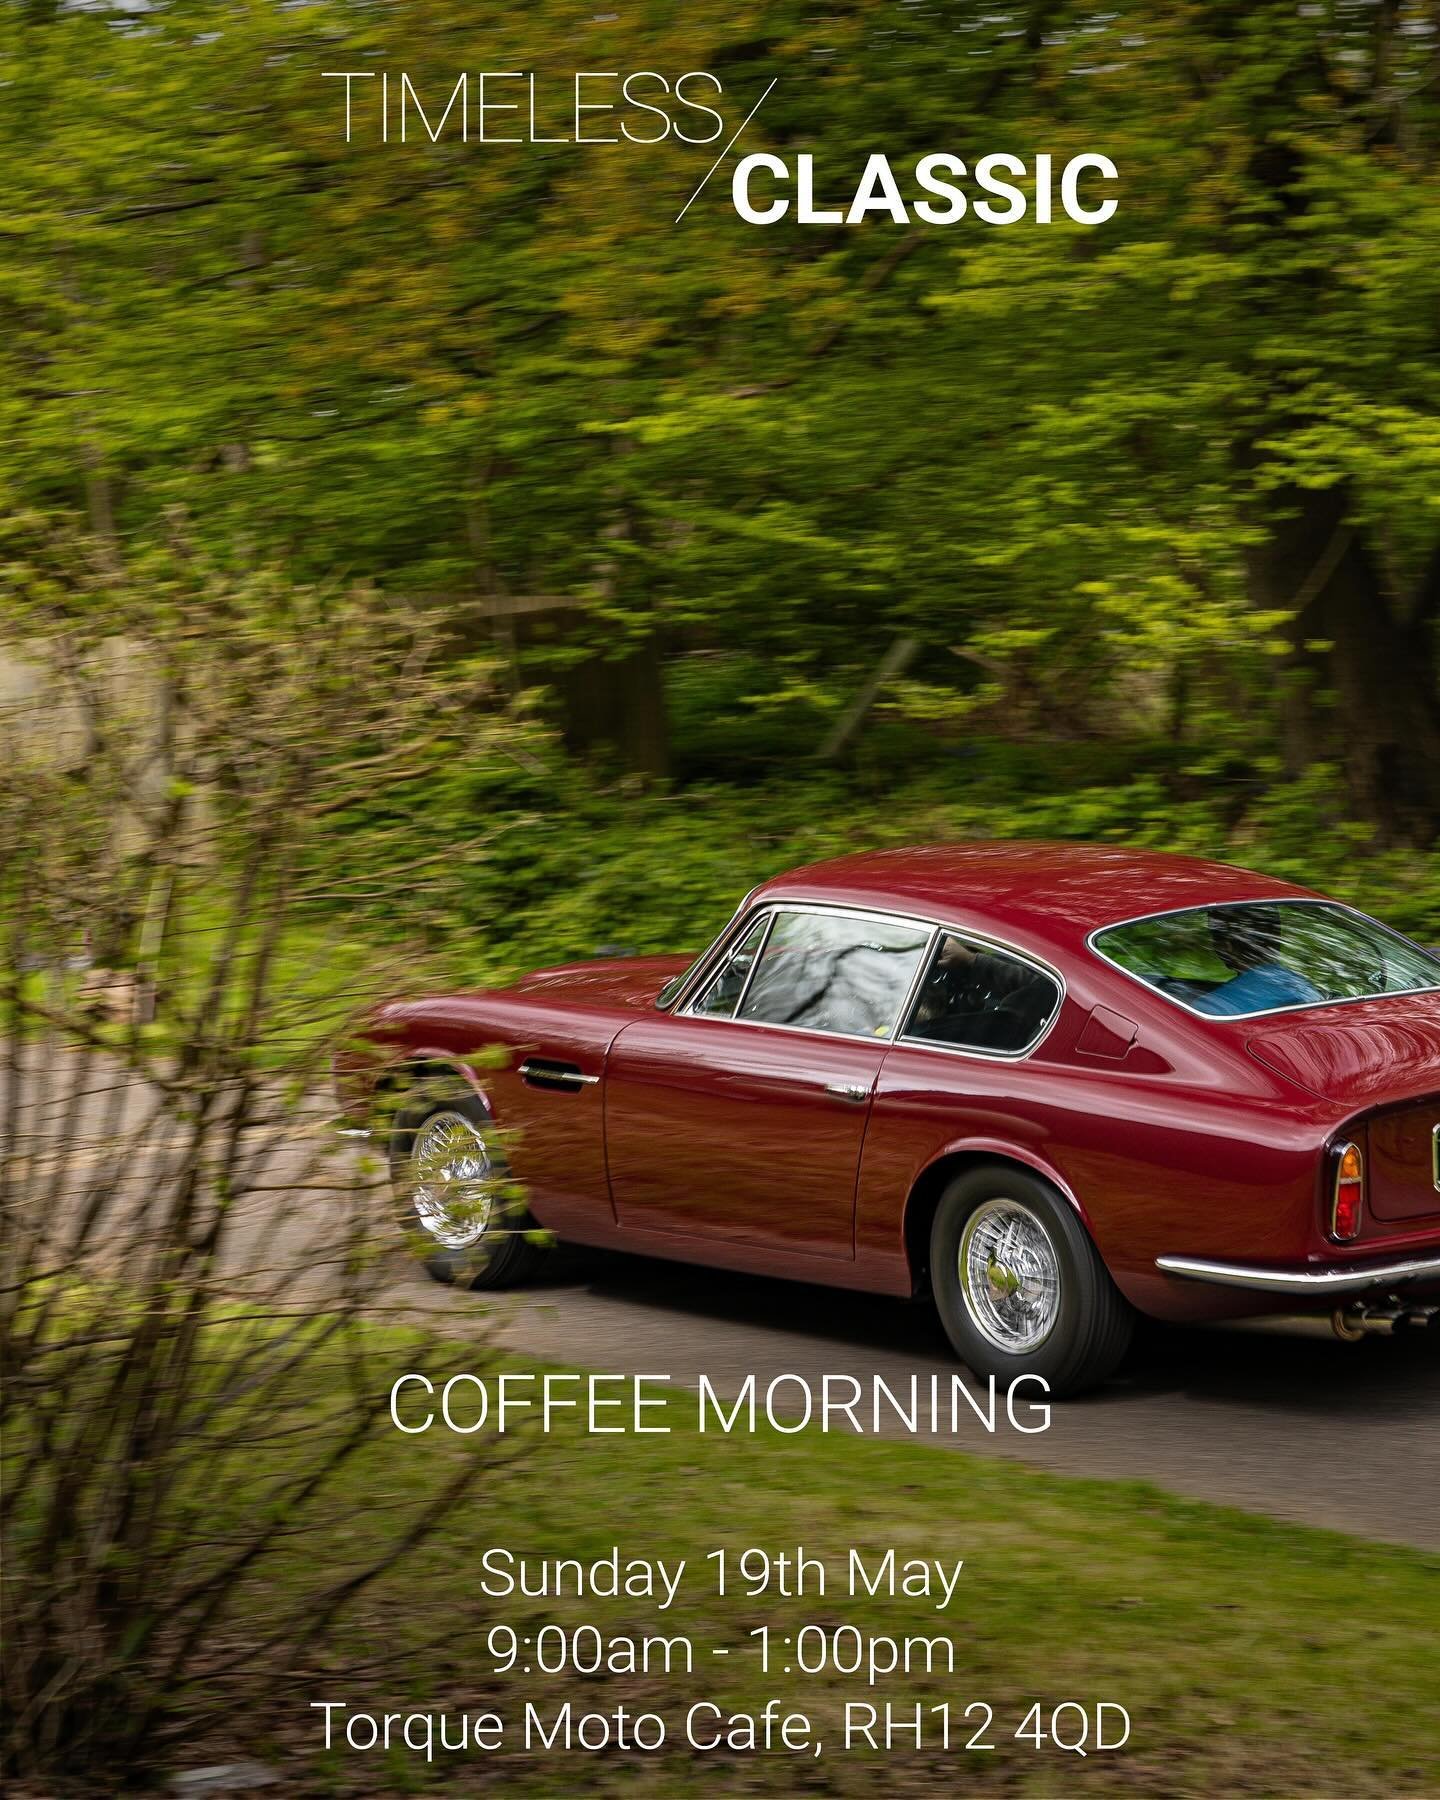 Looking forward to the classics next Sunday #classiccars